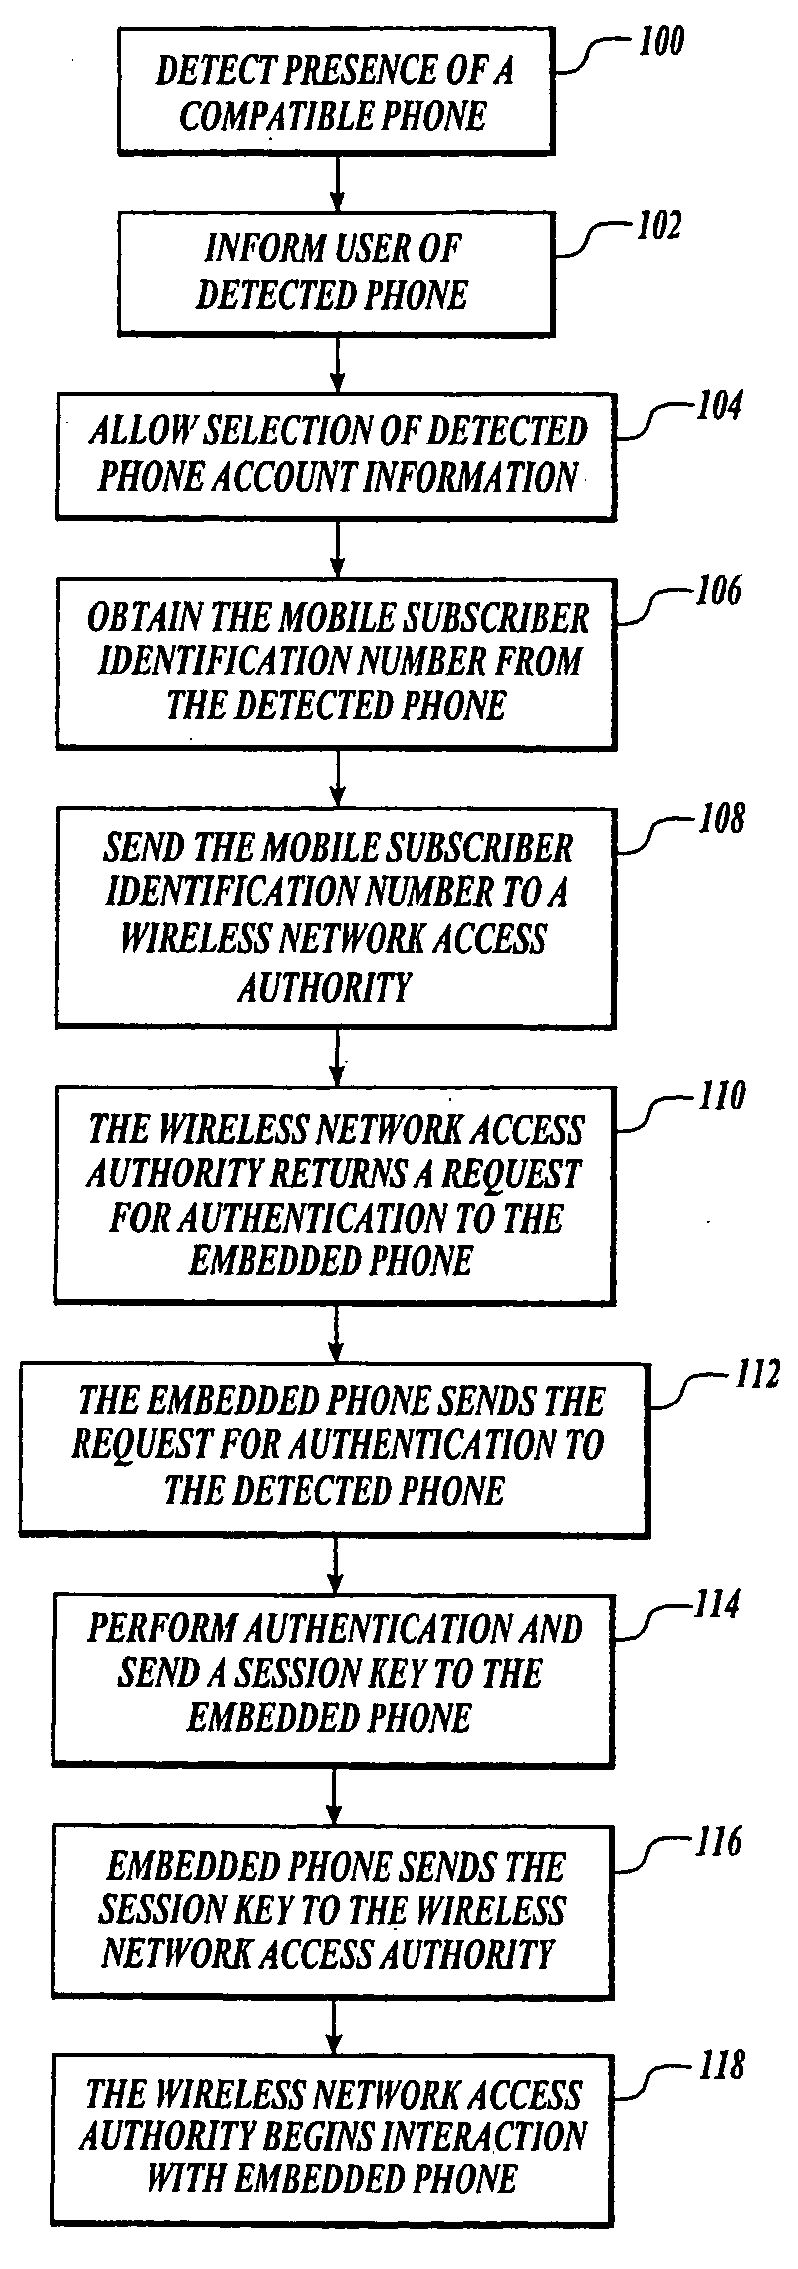 Sharing account information and a phone number between personal mobile phone and an in-vehicle embedded phone